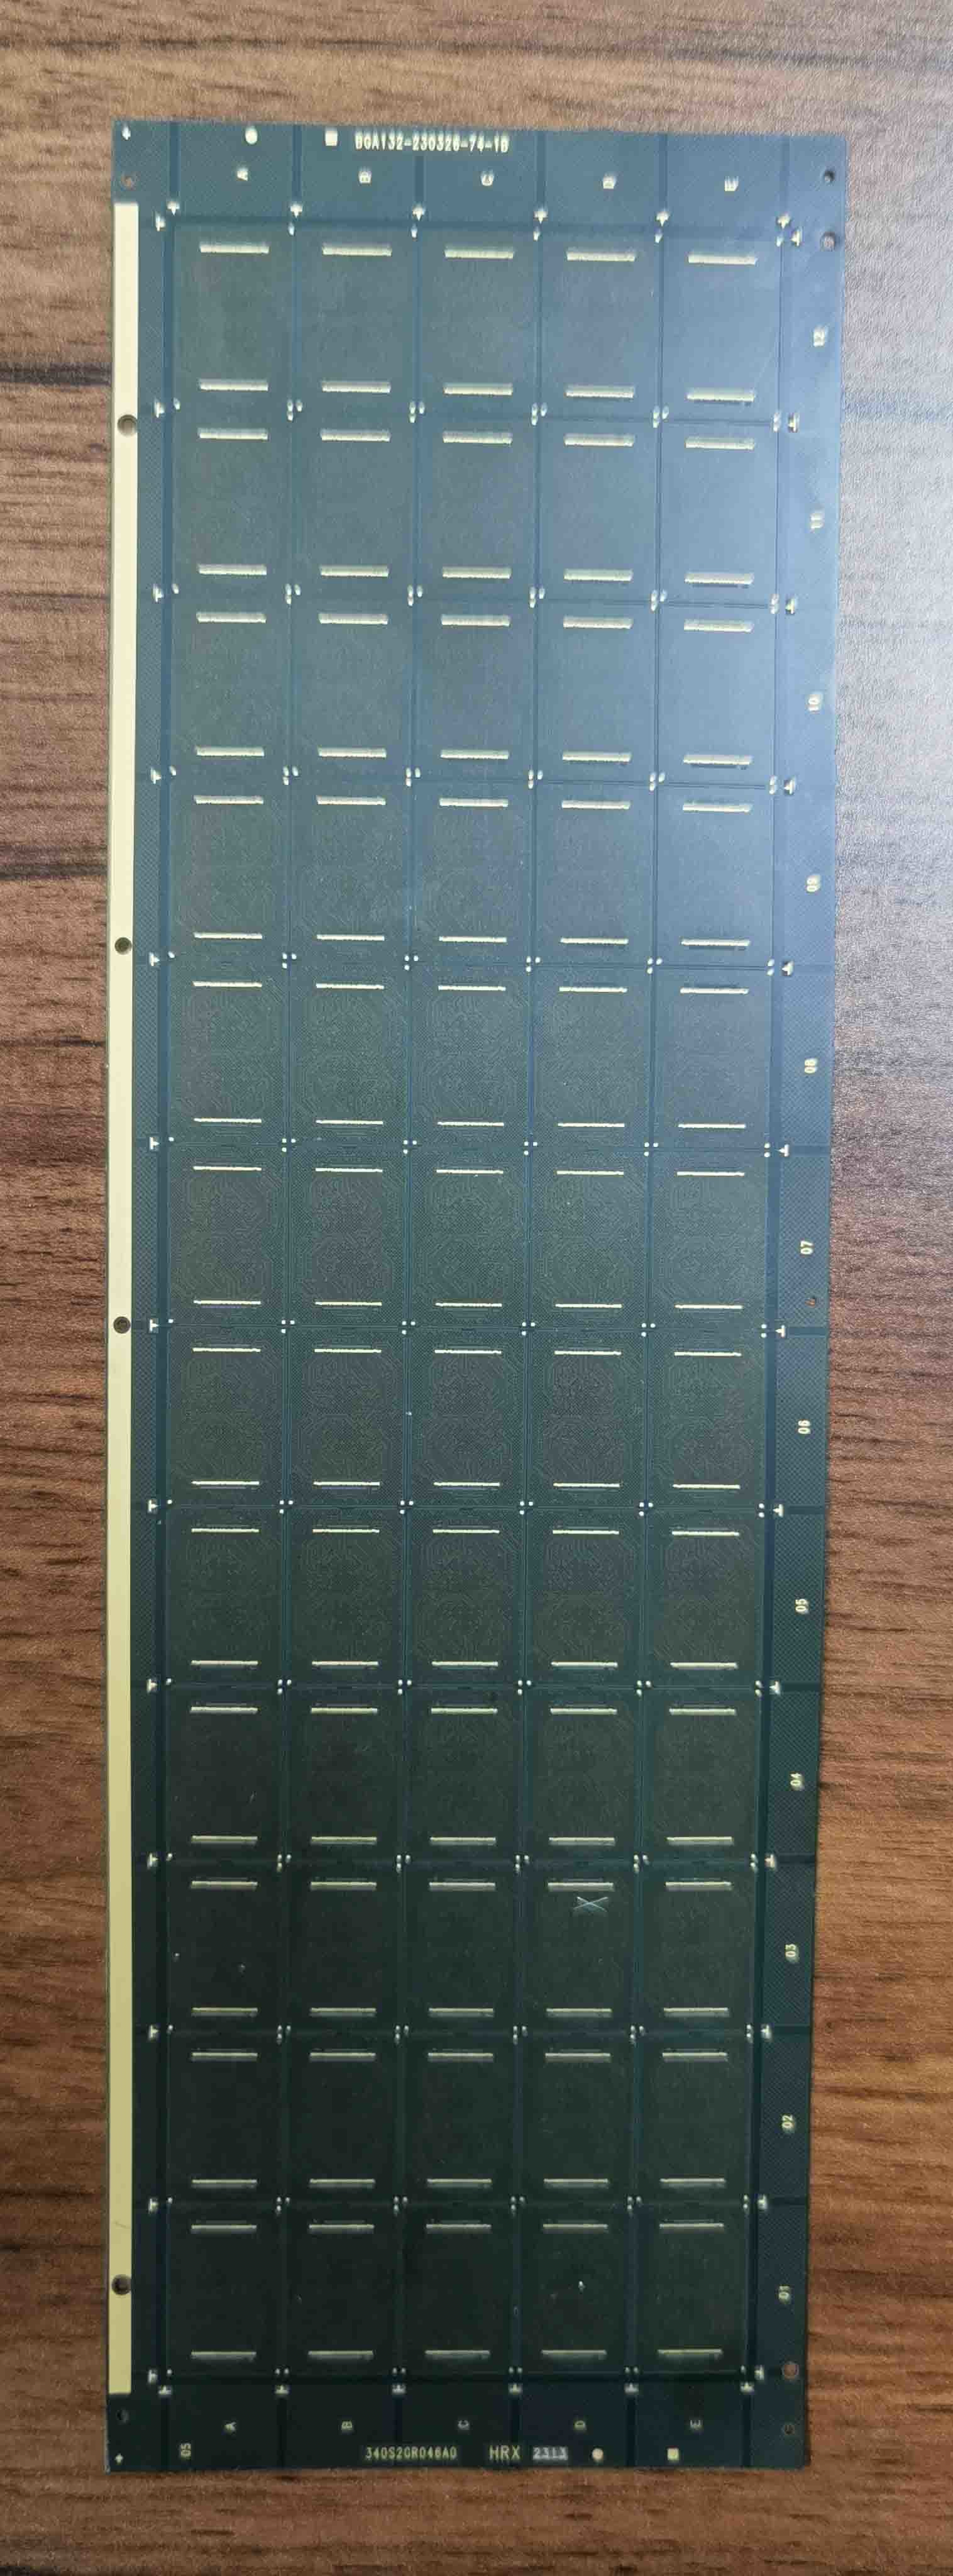 Flash/Nand memory IC substrate manufacture